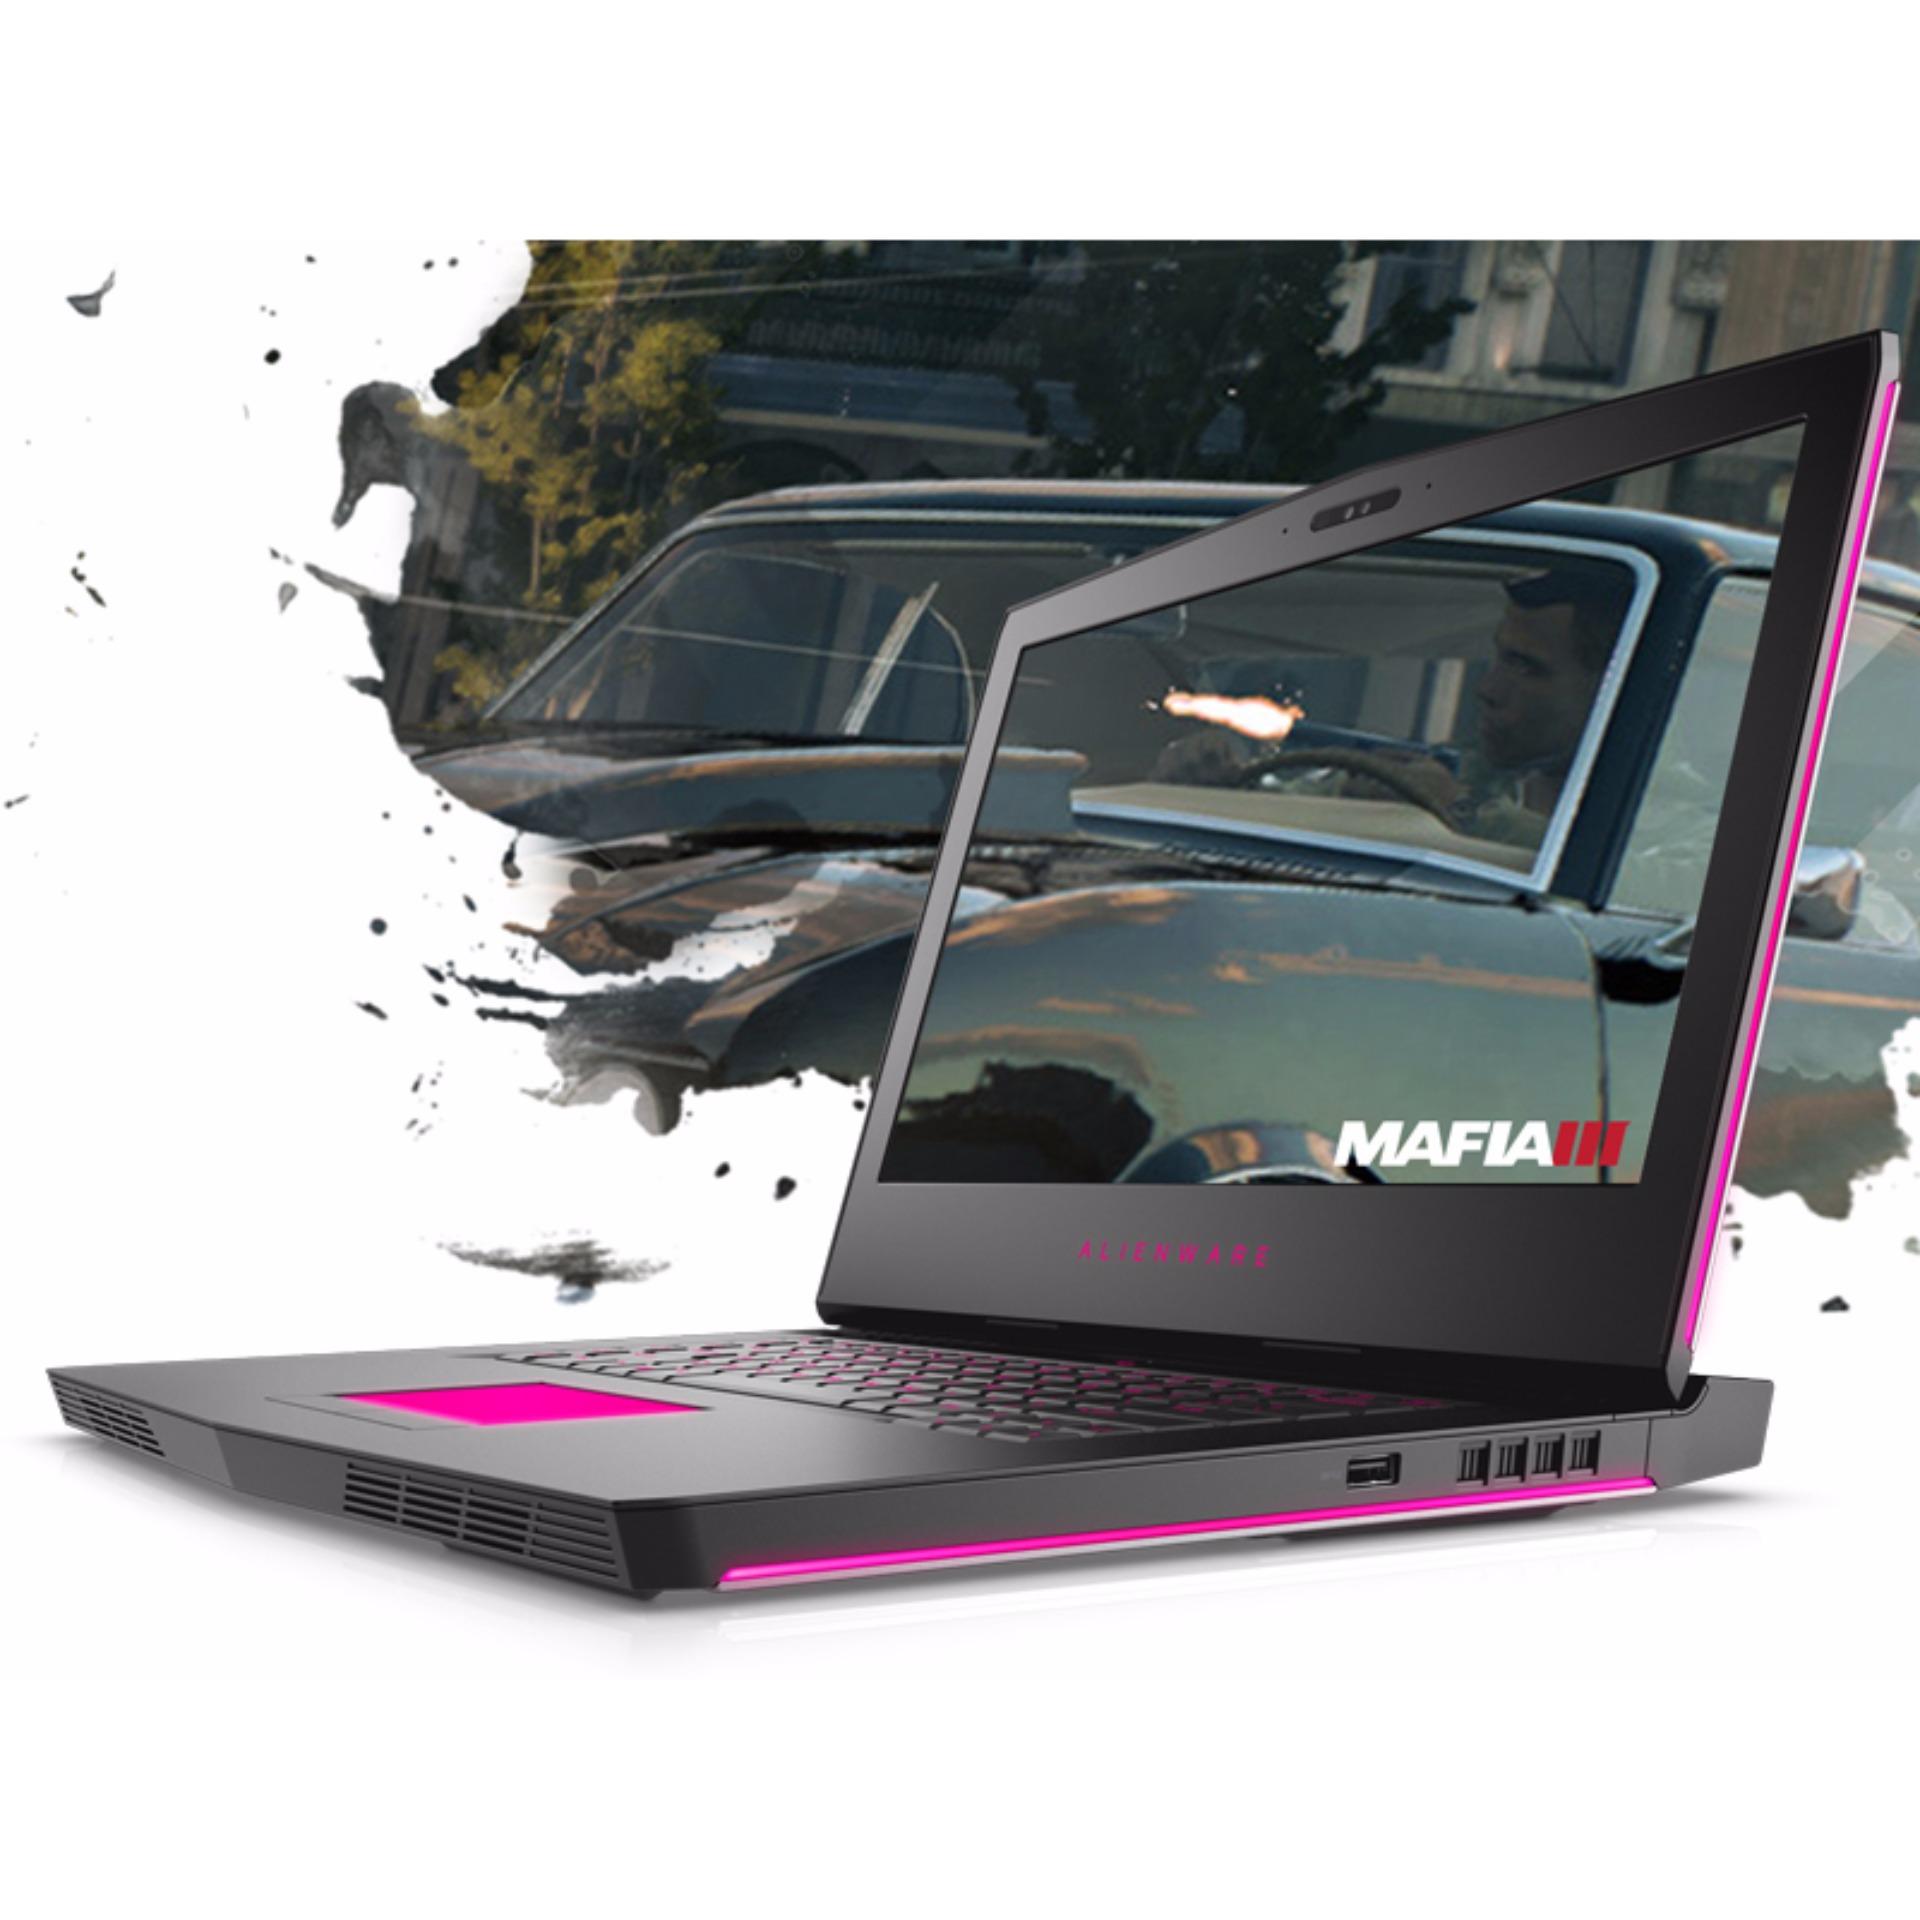 Alienware 15 R3 Gaming Laptop (7th Gen) (GTX1060) With 120Hz Gaming Laptop *END OF MONTH PROMO*